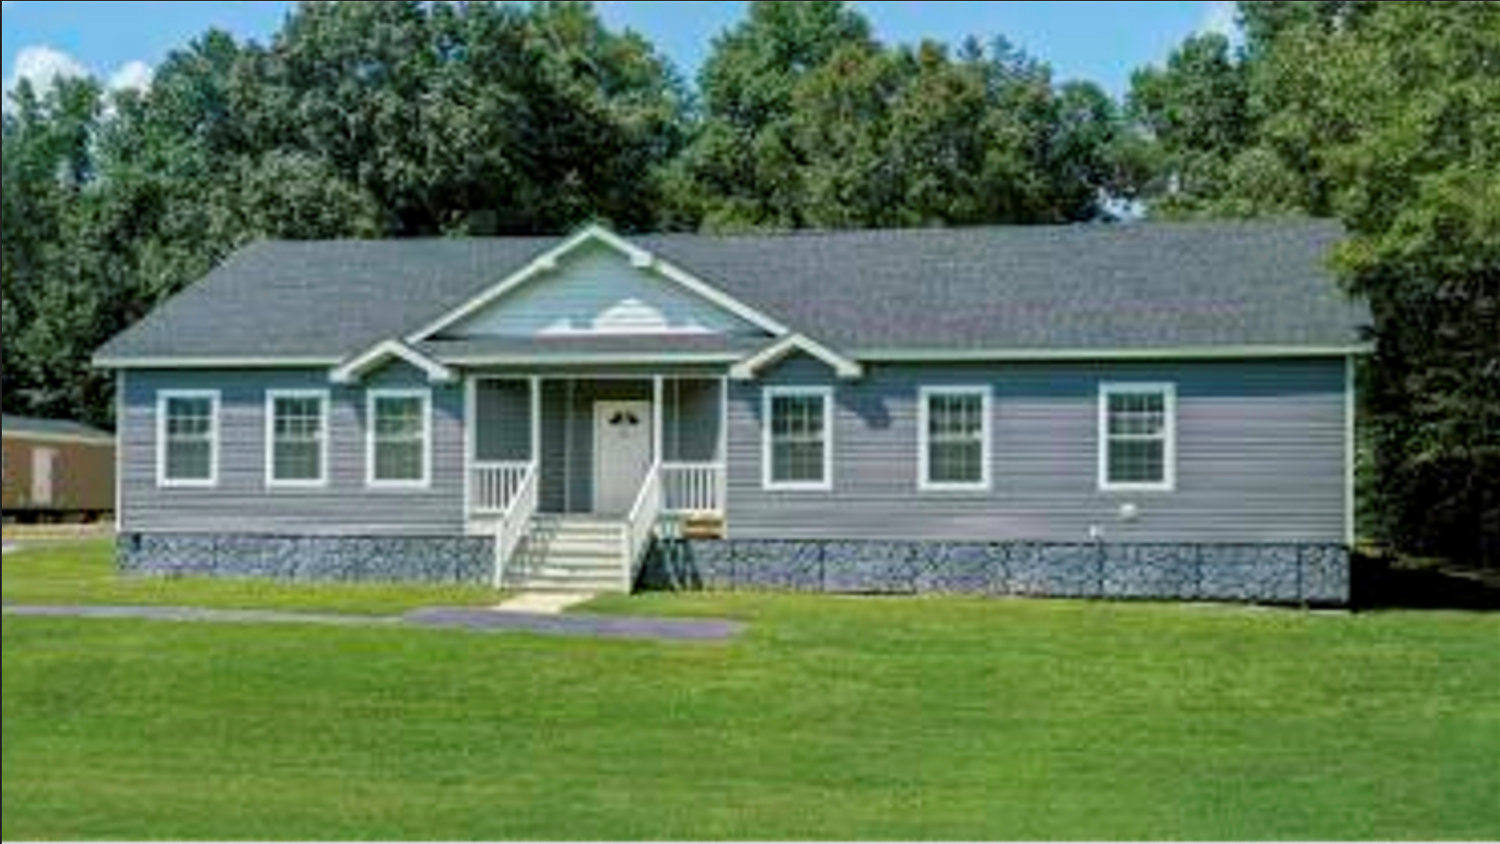 This image shows one of the manufactured home styles that Champion Home Builders plans to produce in its new Scotland County operation.